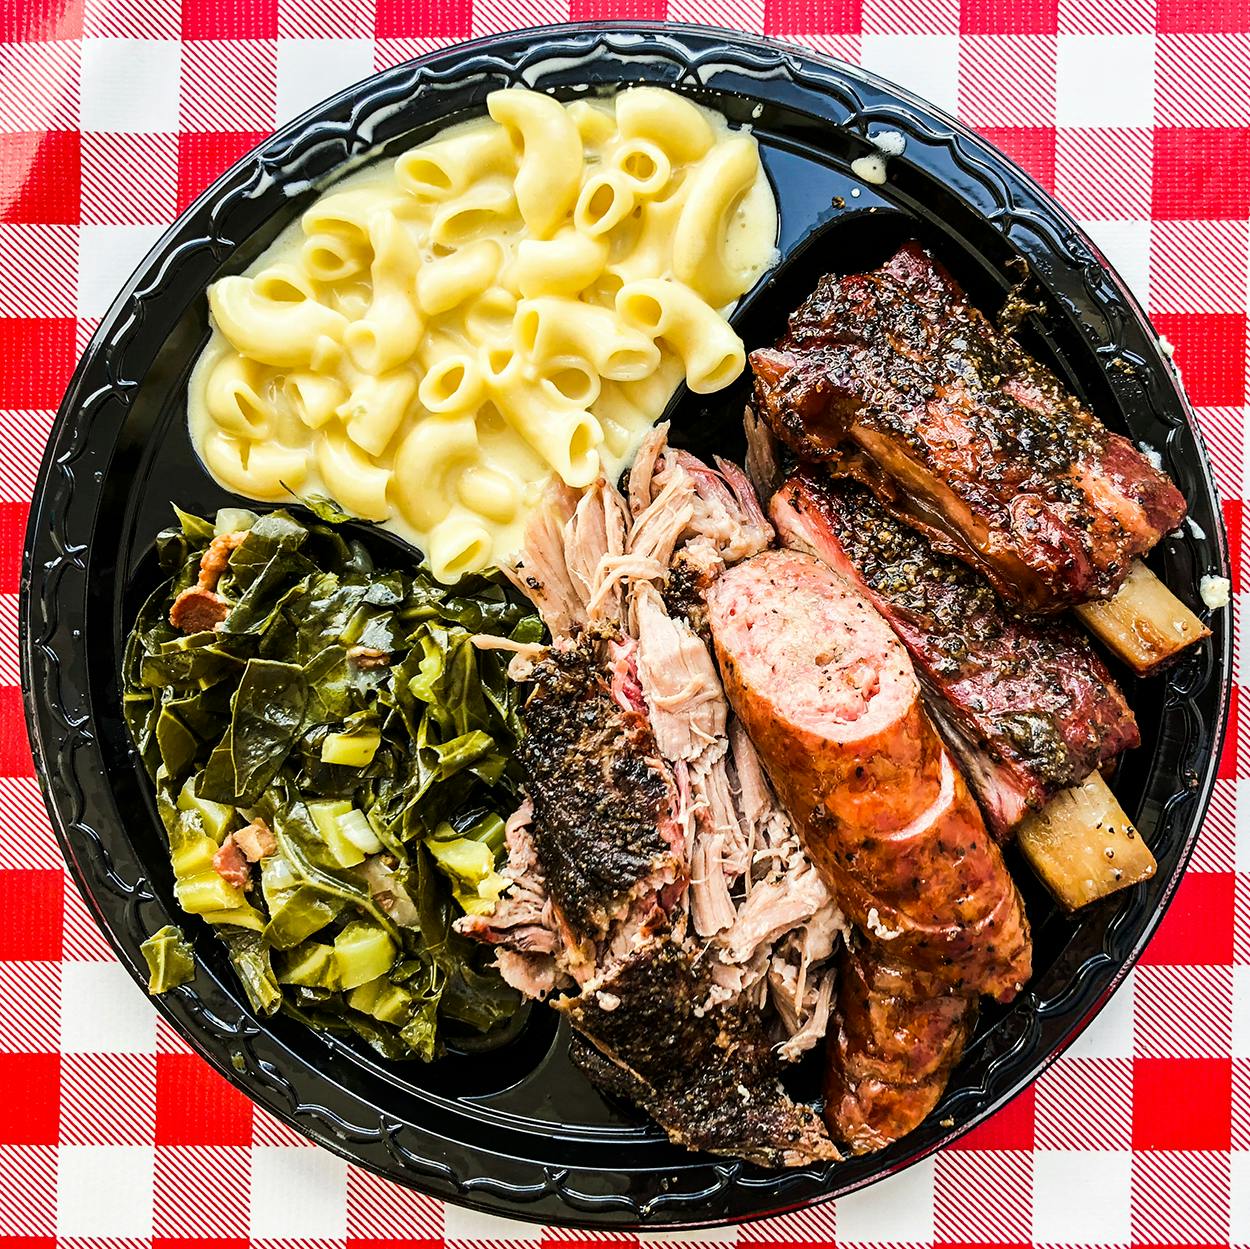 Collard greens with bacon and creamy mac and cheese served alongside pork shoulder, sausage and pork ribs from LJ’s BBQ in Brenham.